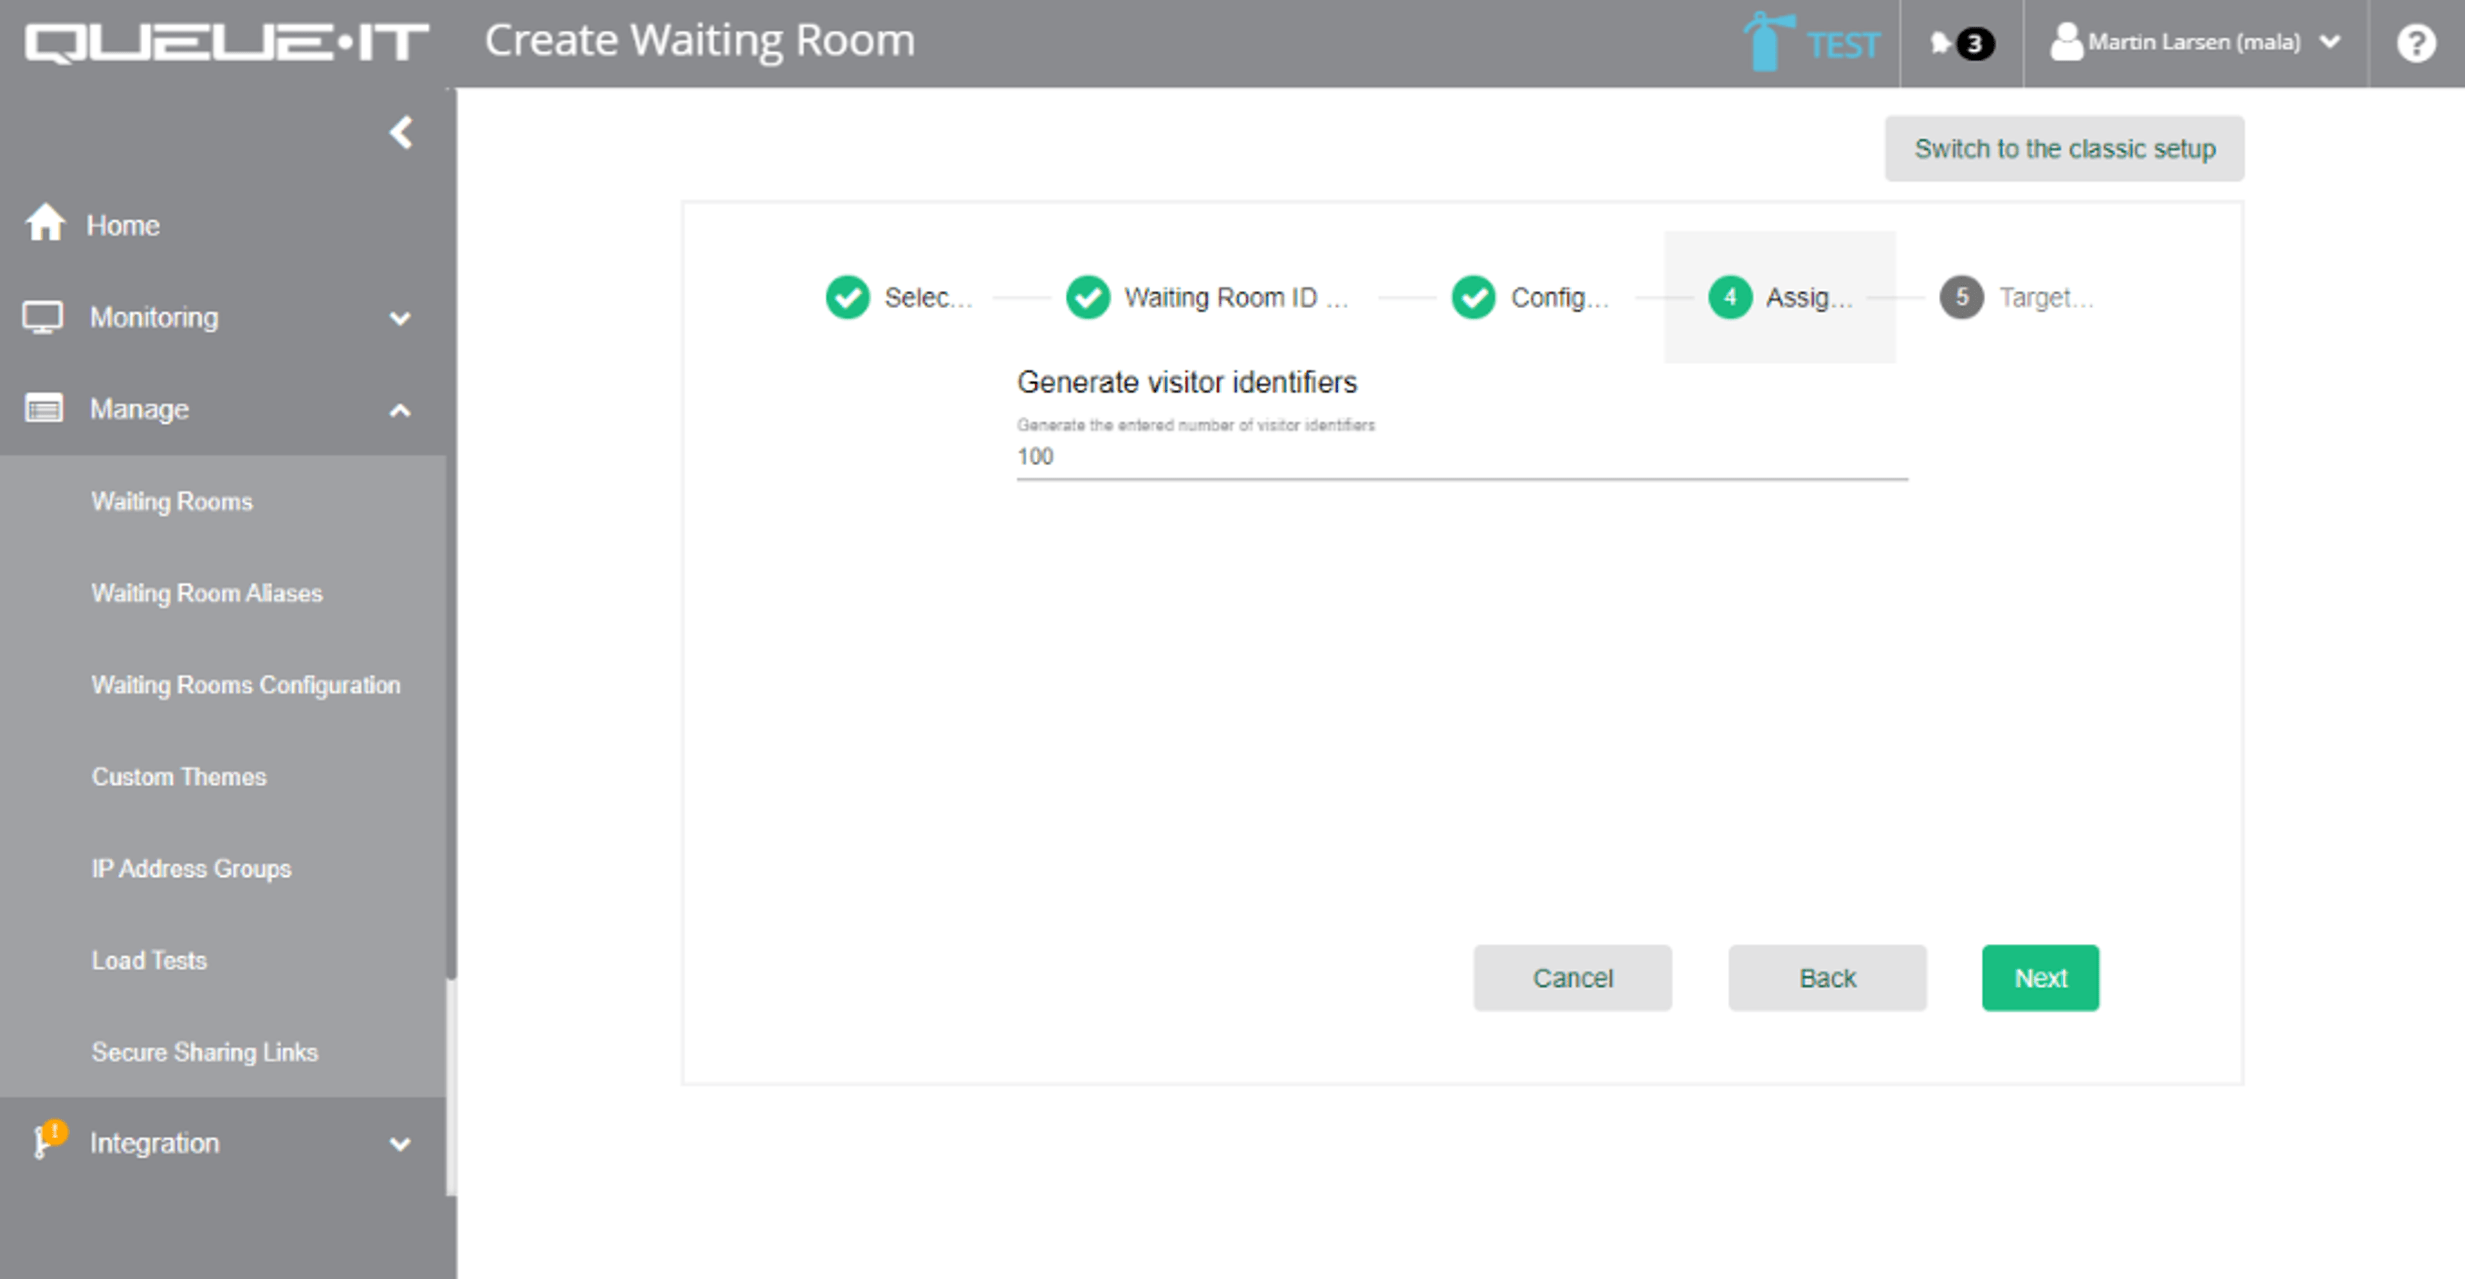 Generating visitor identifiers for an invite-only waiting room